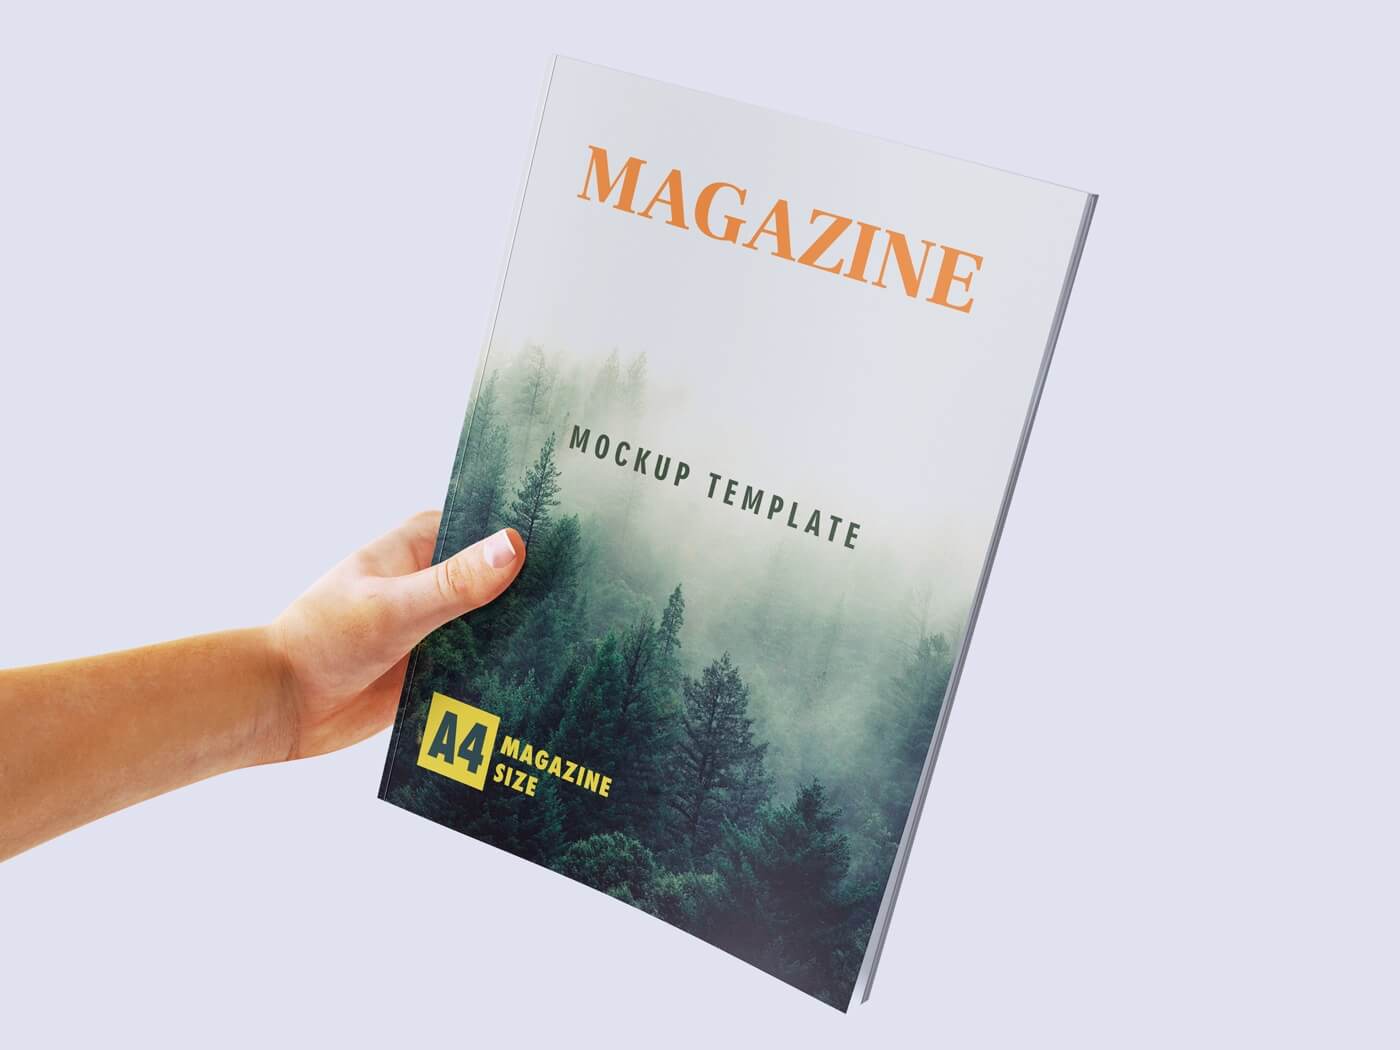 Download Magazine Mockup You Can Found On Vectogravic Design PSD Mockup Templates